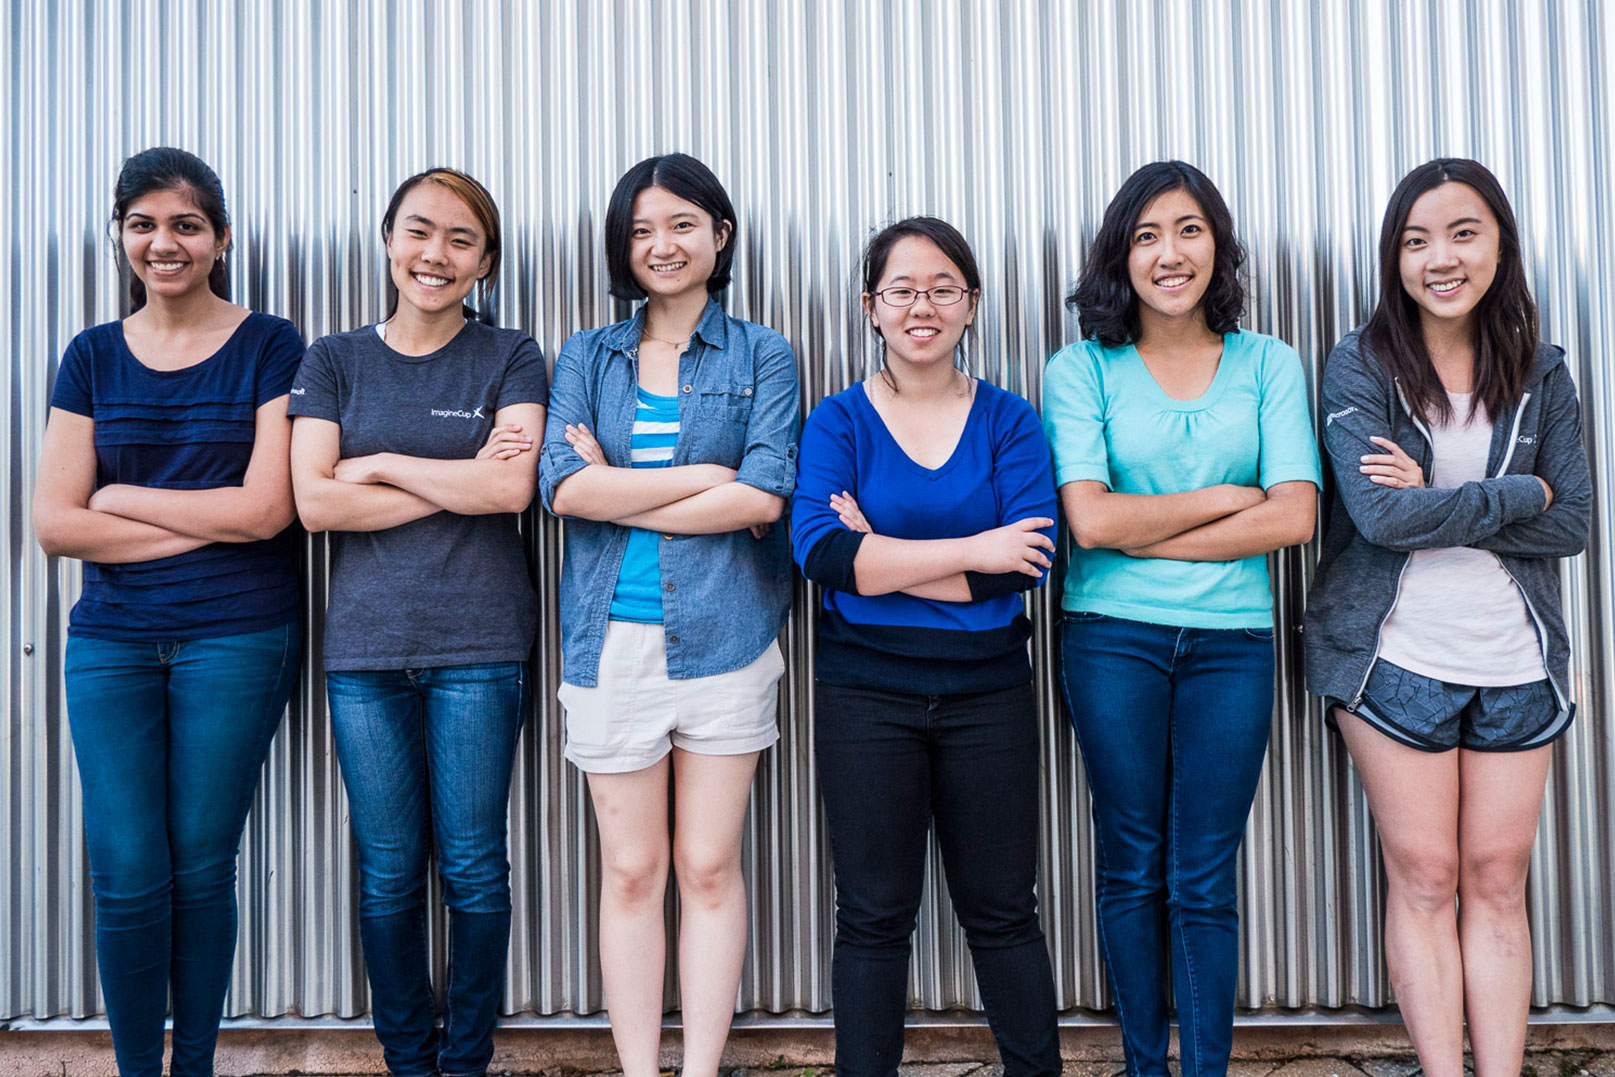 Portrait of the six students smiling and standing with their arms crossed against a corrugated metal wall